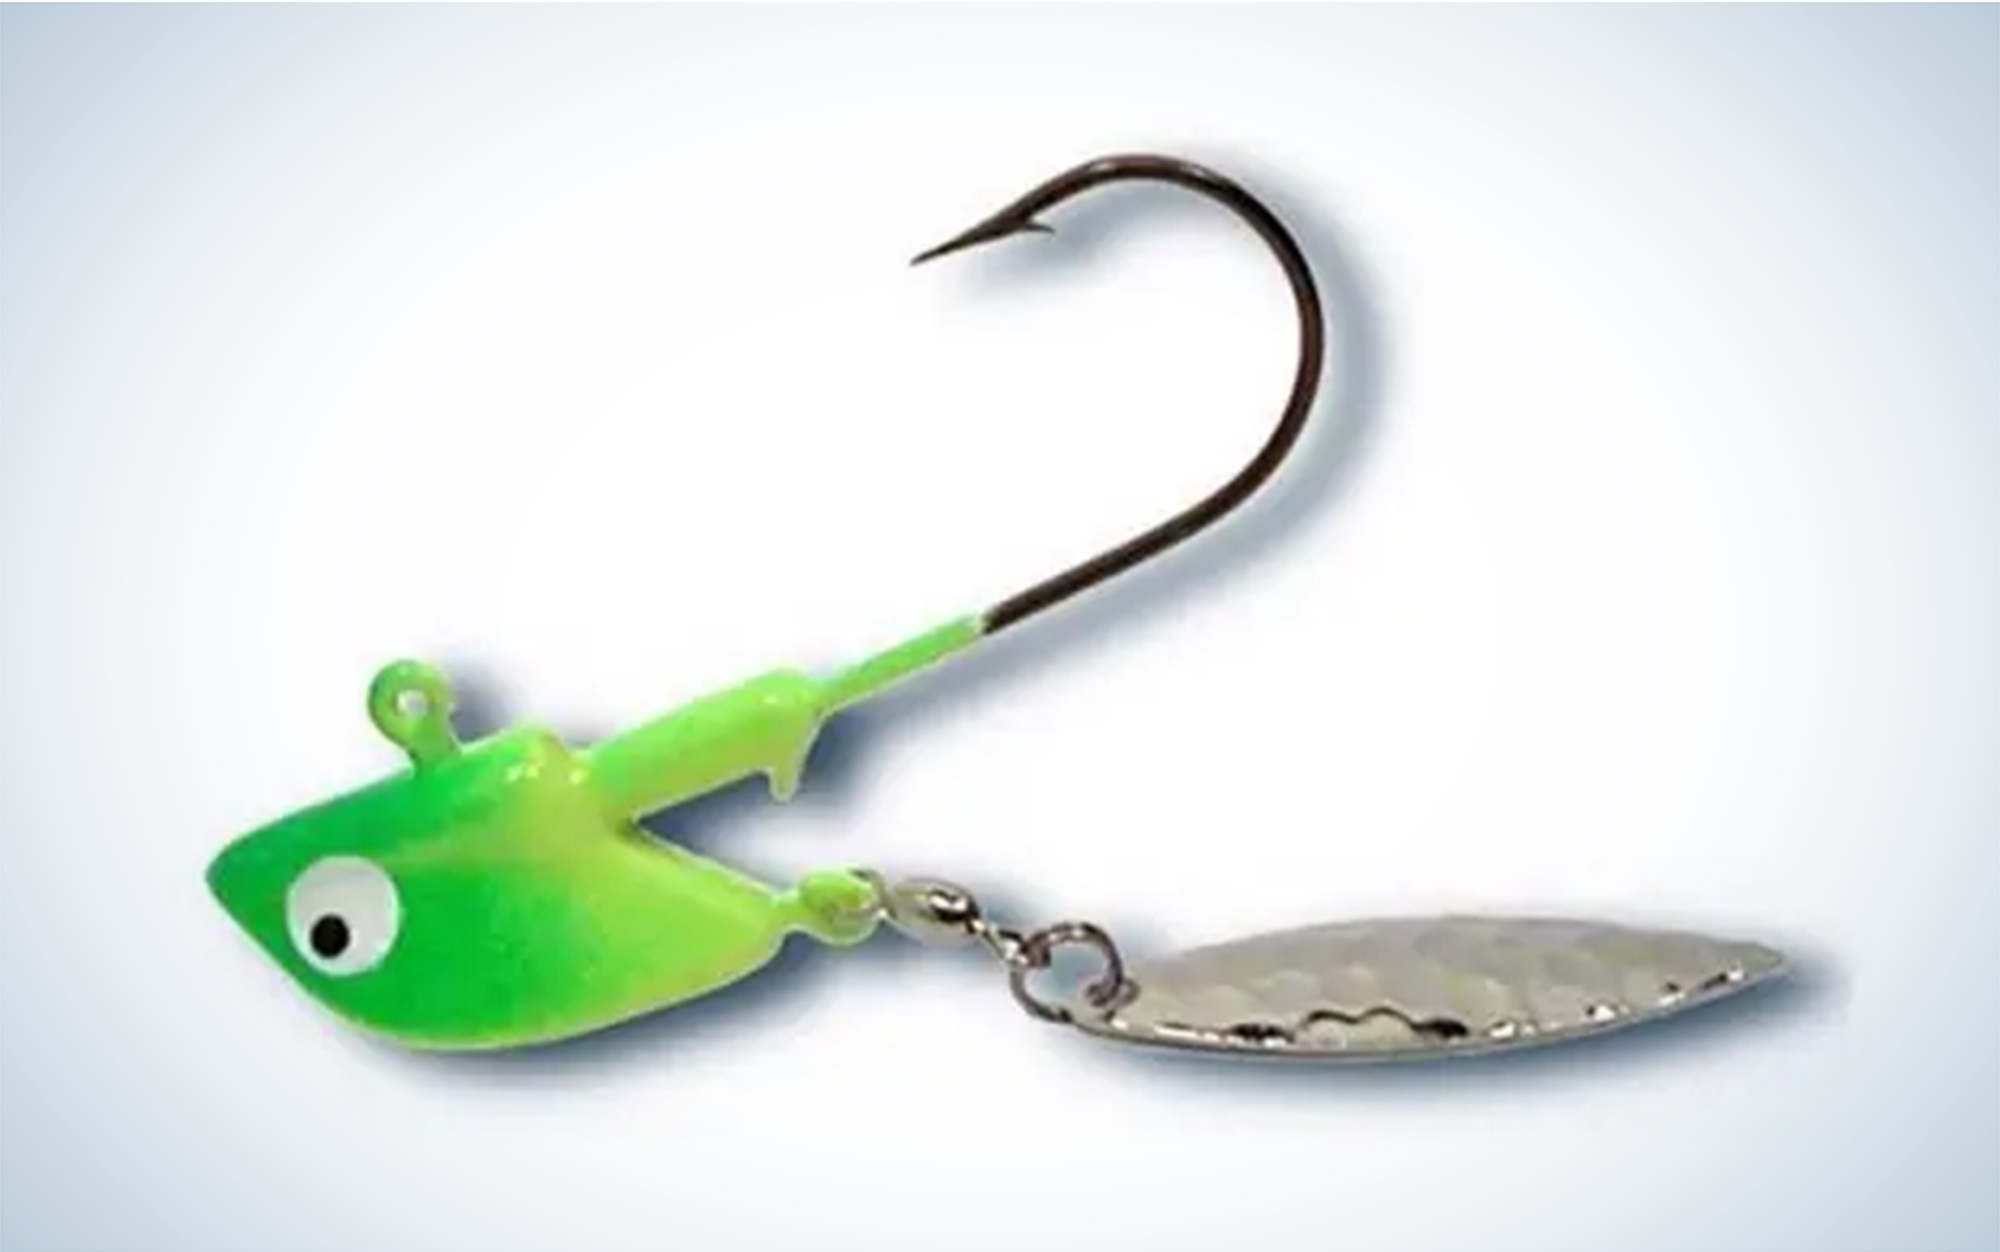 2 Rembrant Jig, Ice Fishing Lures, Perch Ice Fishing Lures